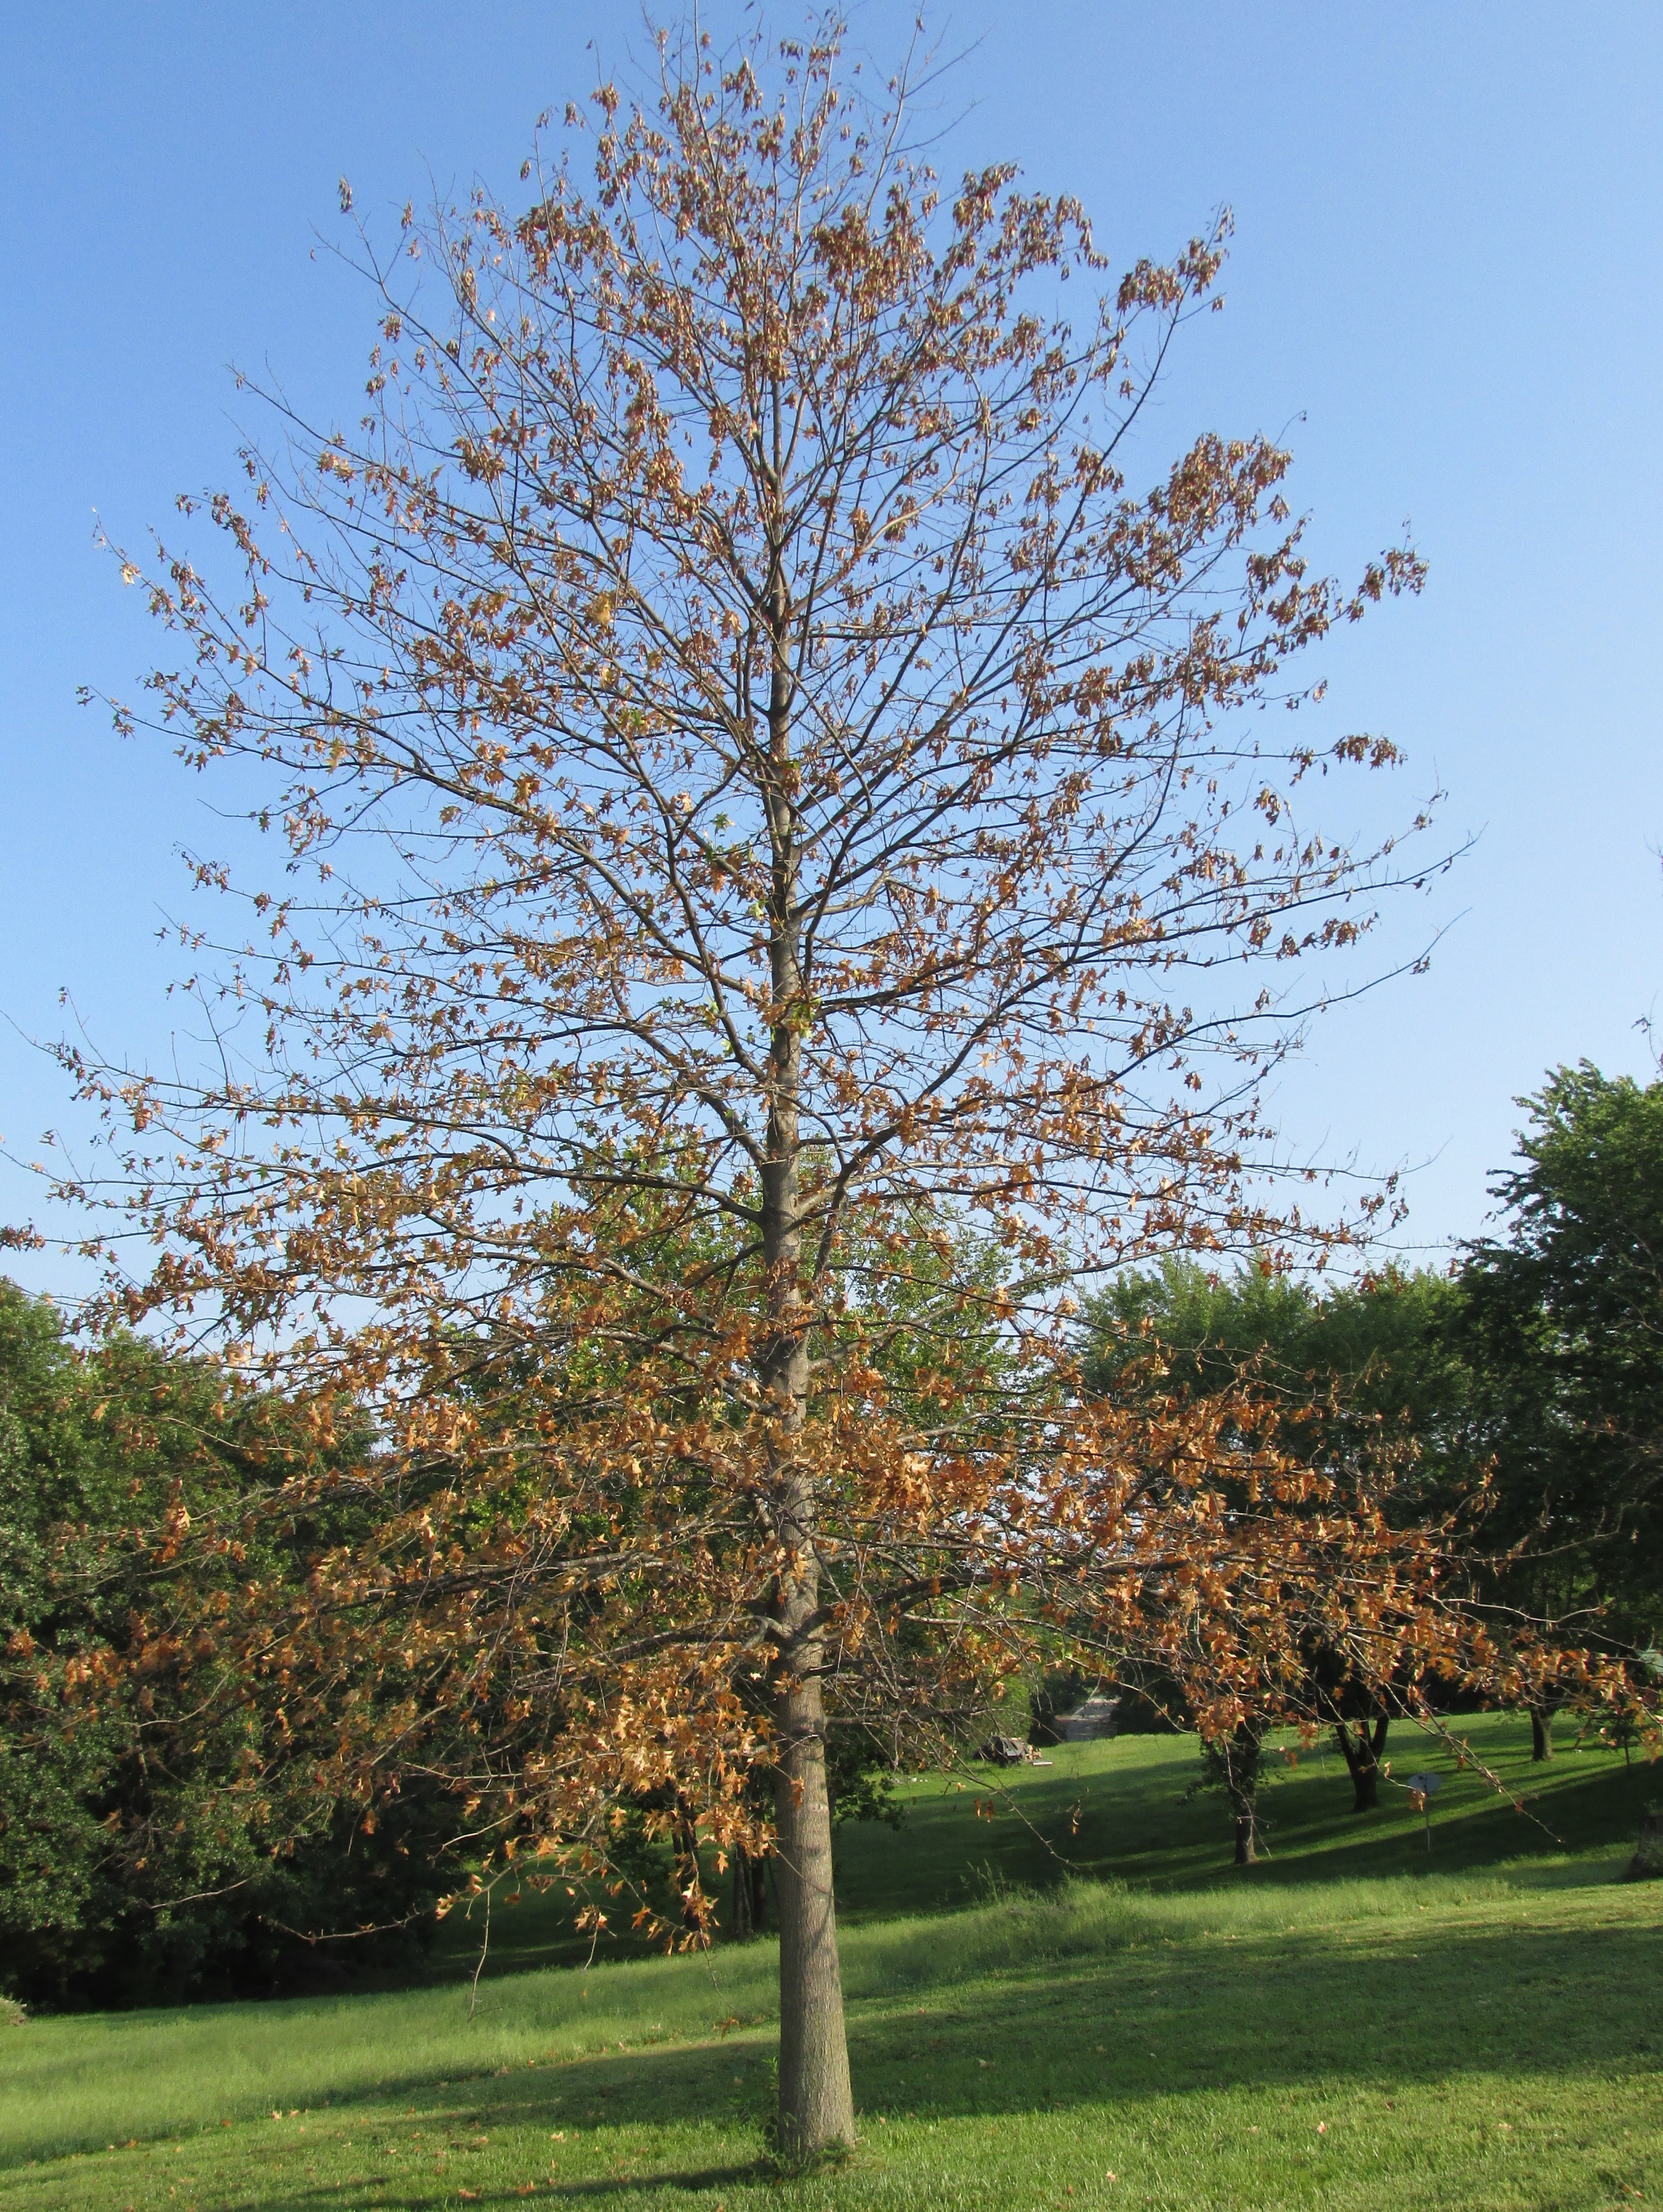 Tree with only sparse and browned leaves